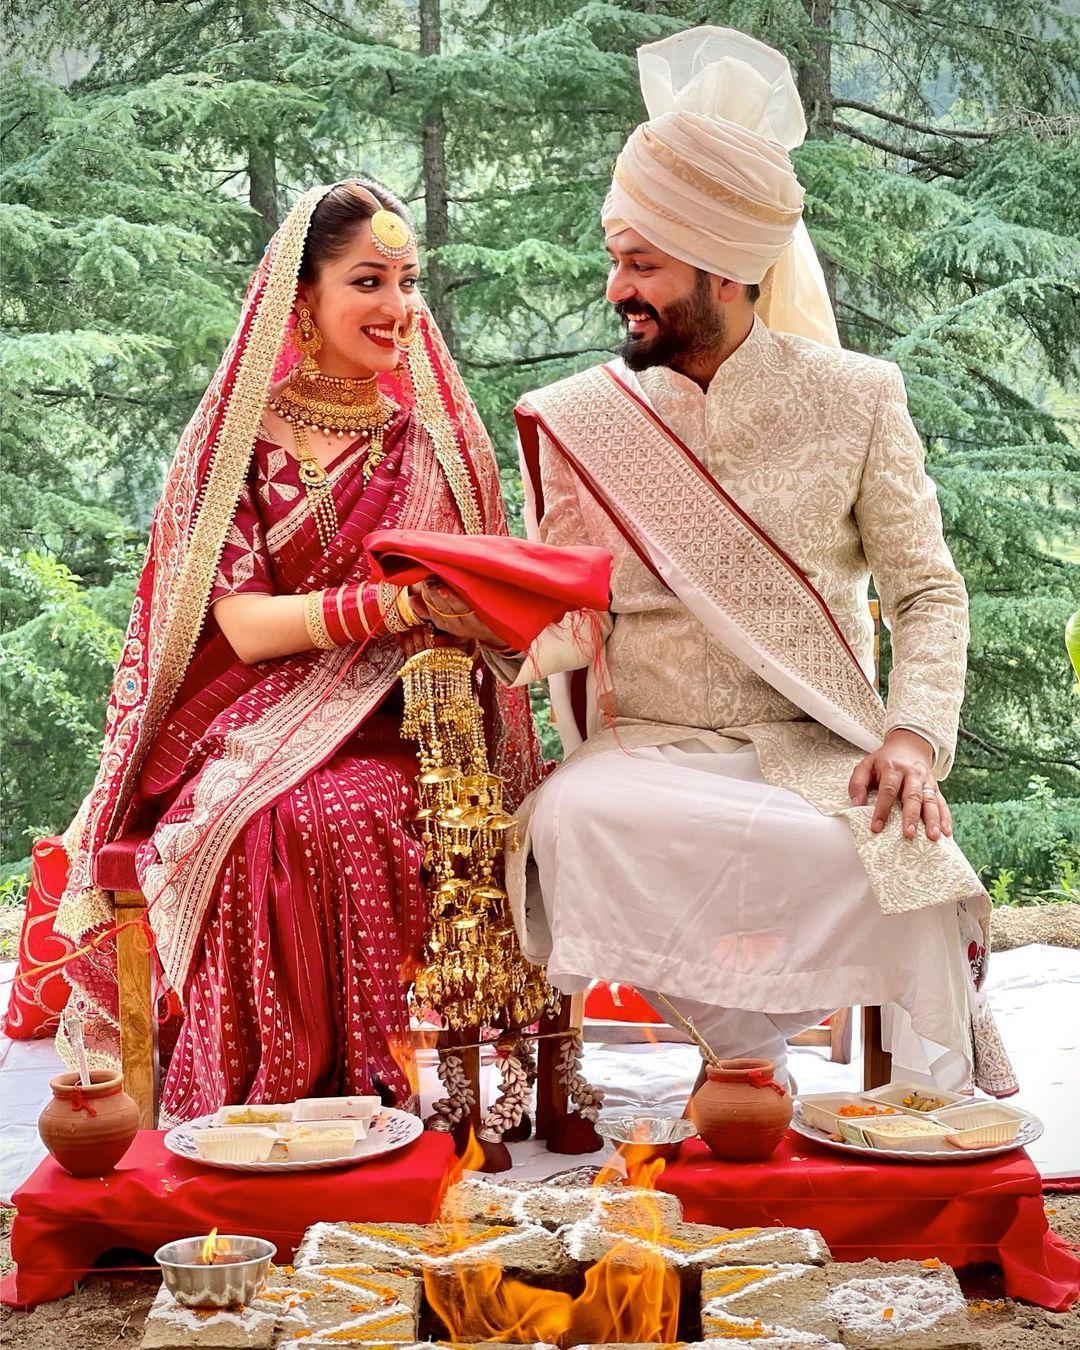 It was on June 4, 2021, when Aditya and Yami tied the knot amid the gorgeous scenery of Himachal Pradesh